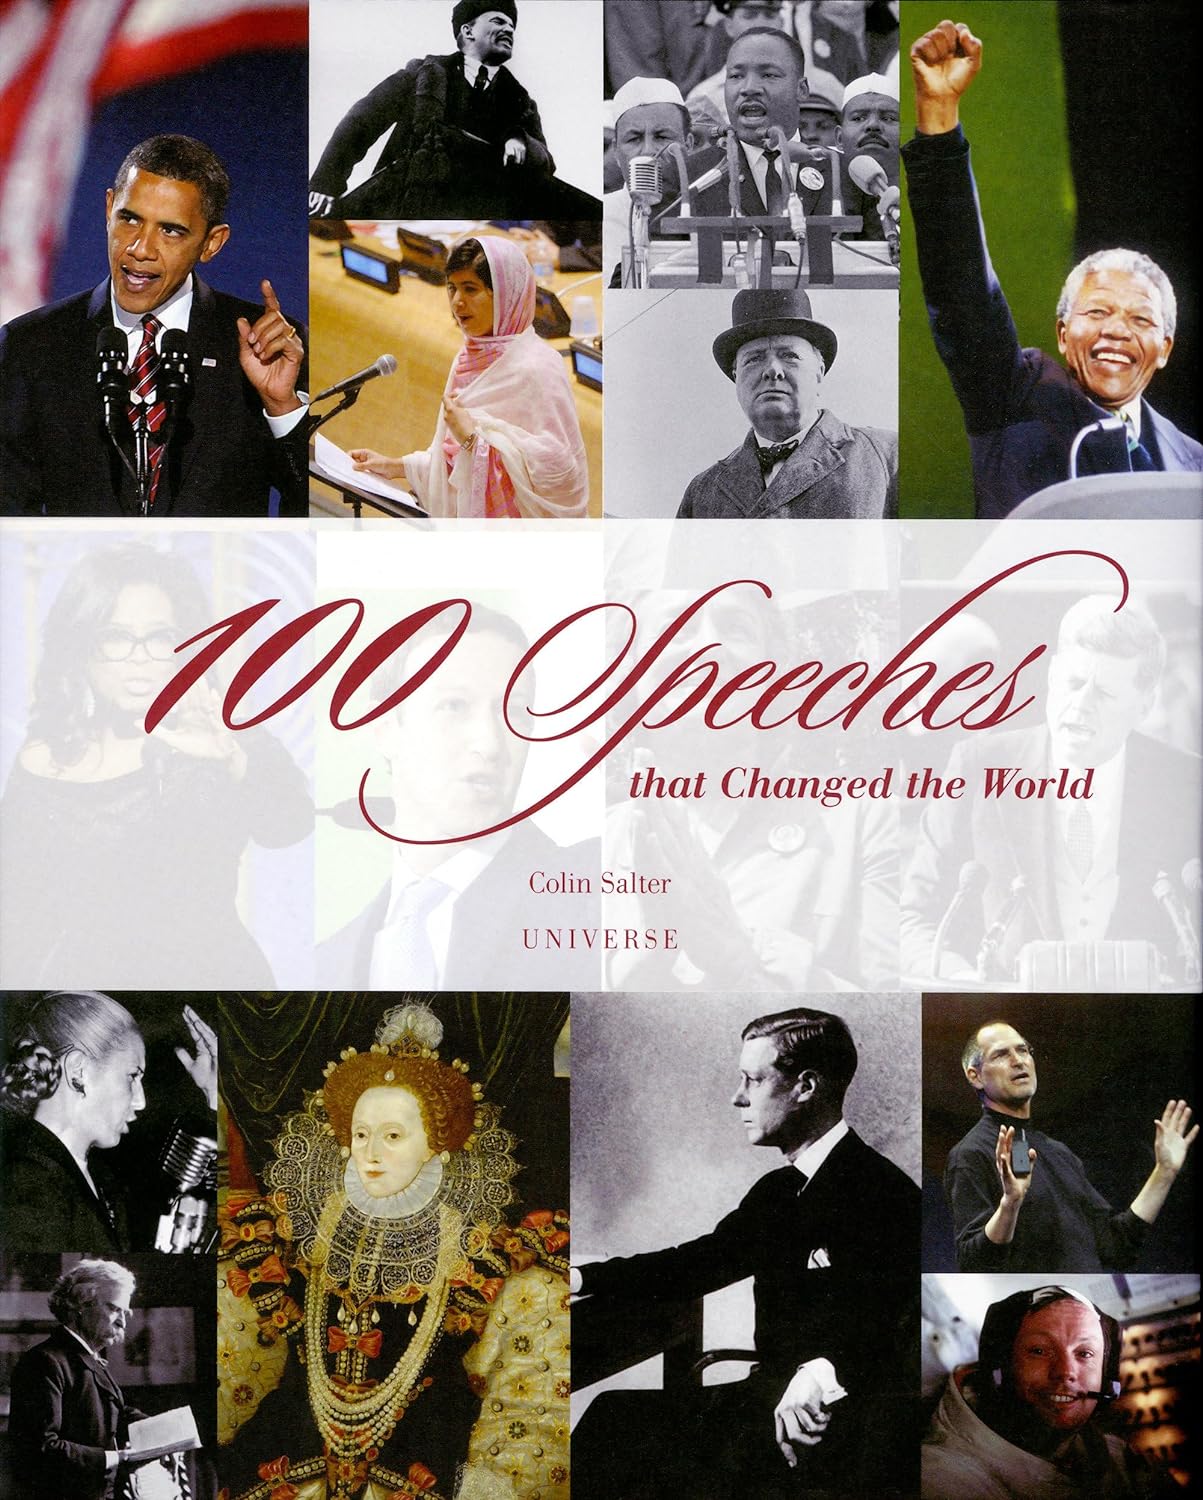 100 Speeches That Changed the World (Hardcover)